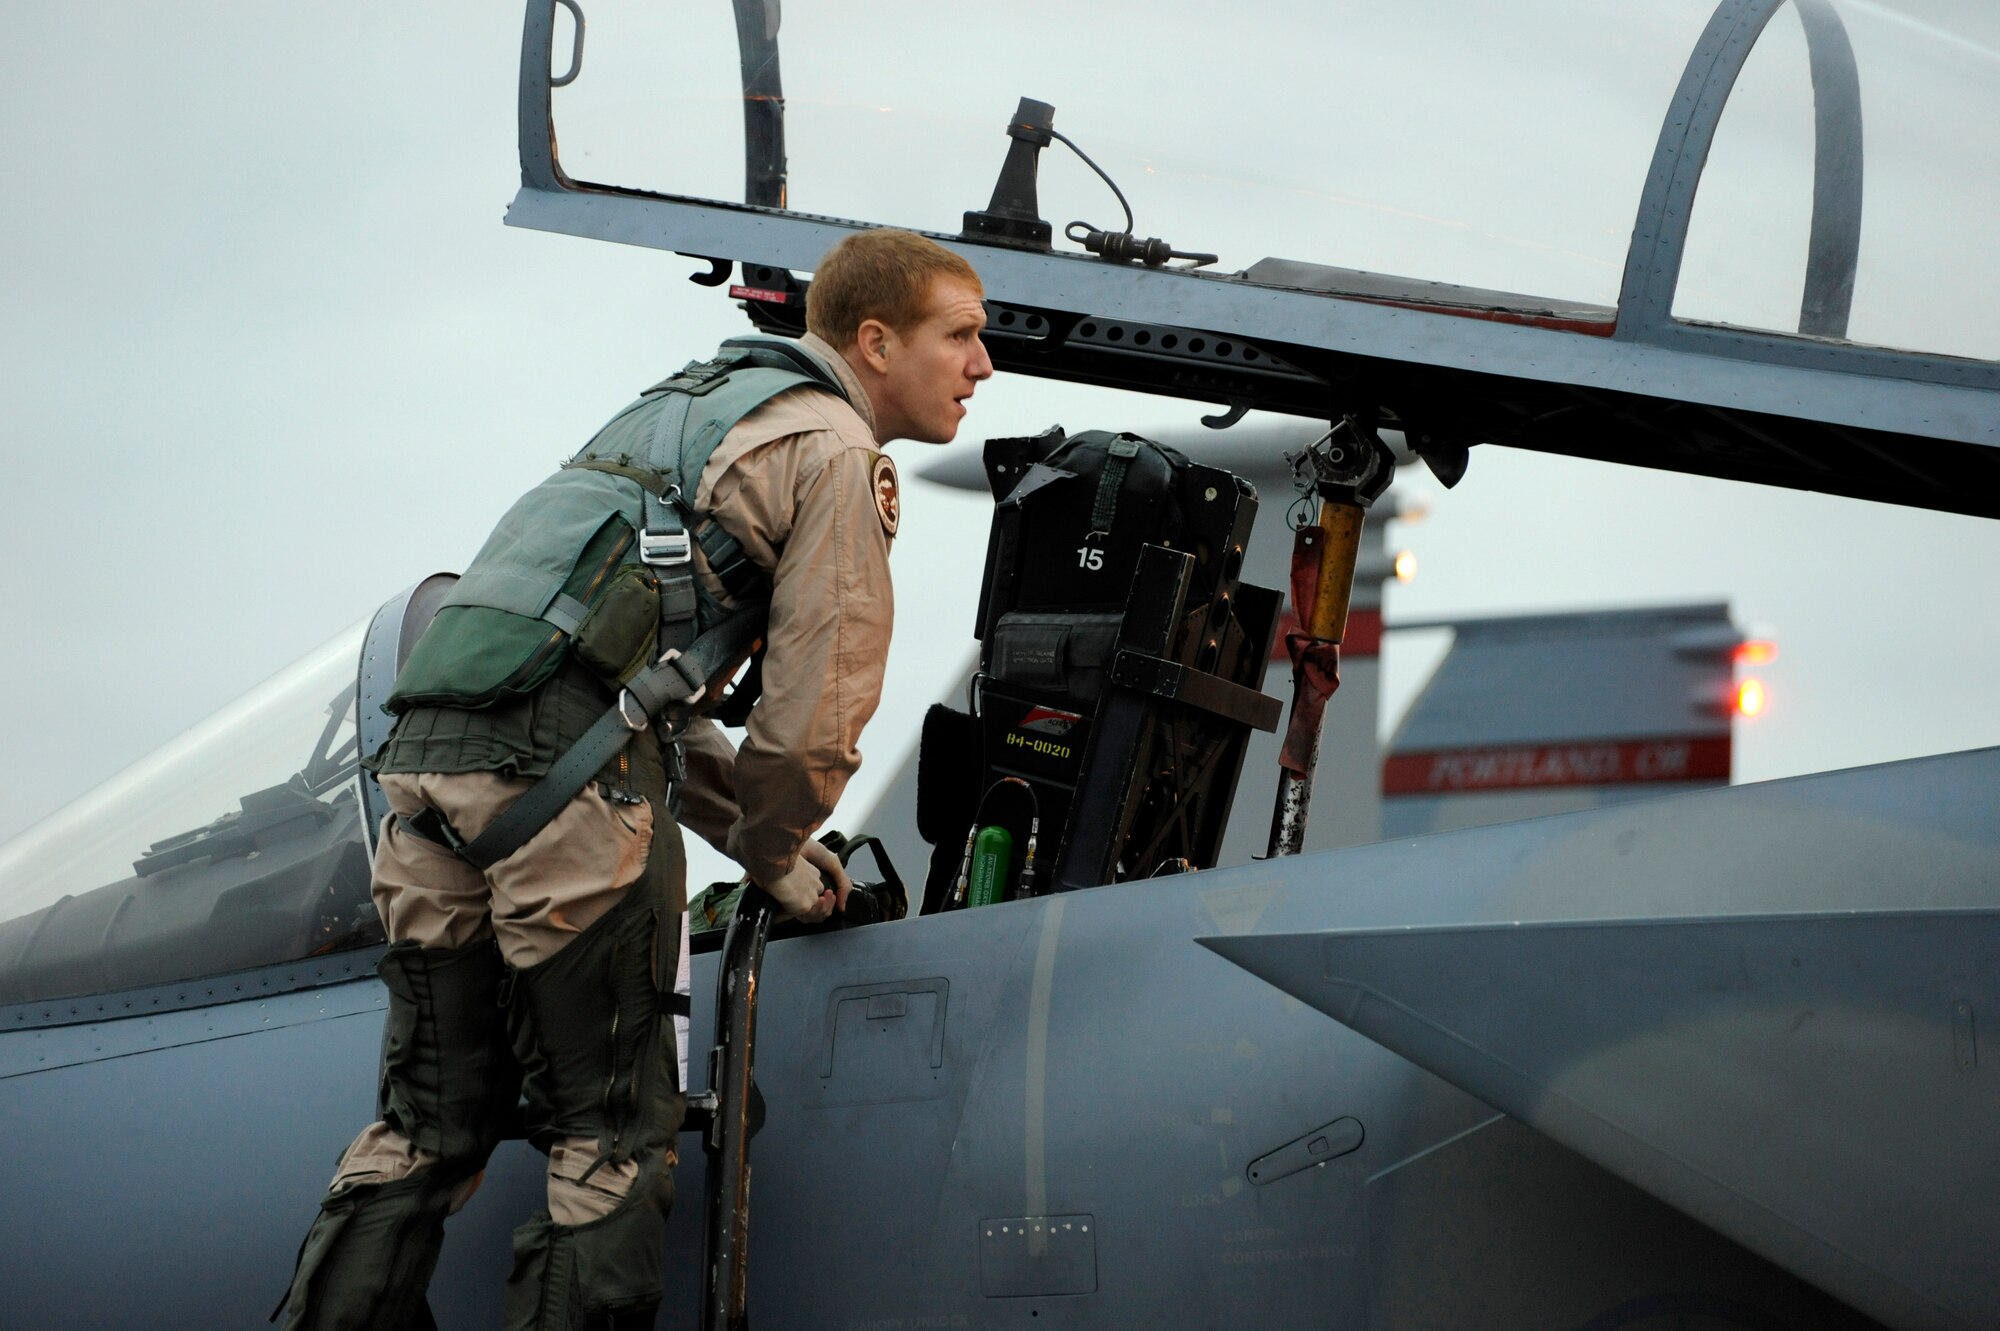 Oregon Air National Guard Major Adam Sitler goes through the pre-flight check of his F-15C Eagle prior to take off on October 2nd, 2010 at the Portland Air National Guard Base, Portland, Ore. (US Air Force photography by Staff Sgt. John Hughel, 142nd Fighter Wing Public Affairs)